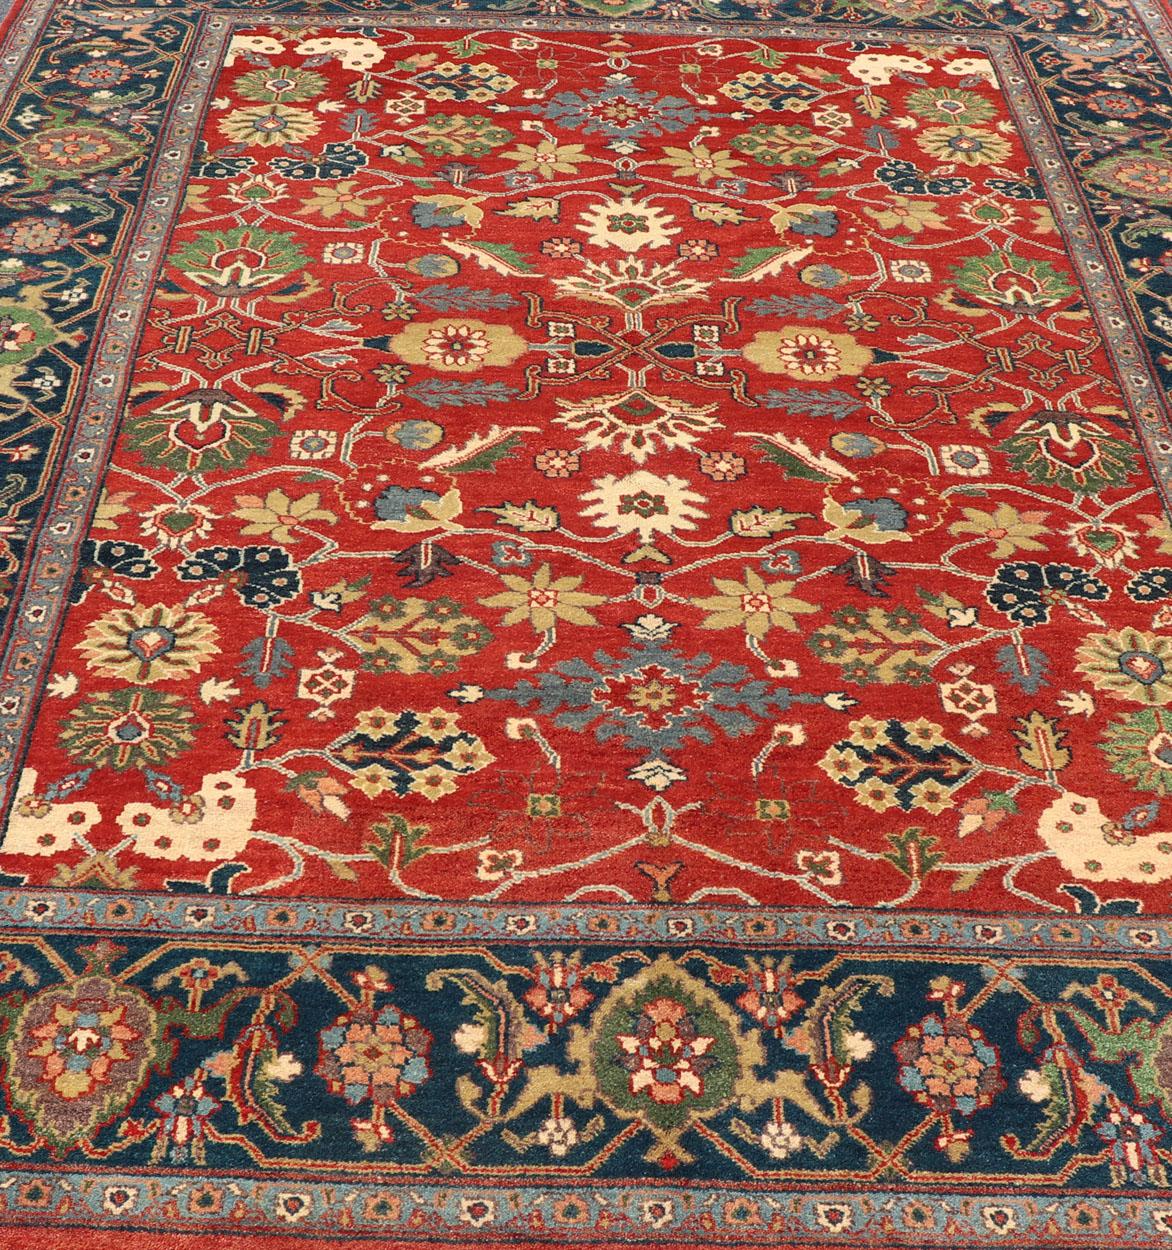 Indian Reproduction Sultanabad-Mahal All-over Floral Hand-Knotted Carpet 